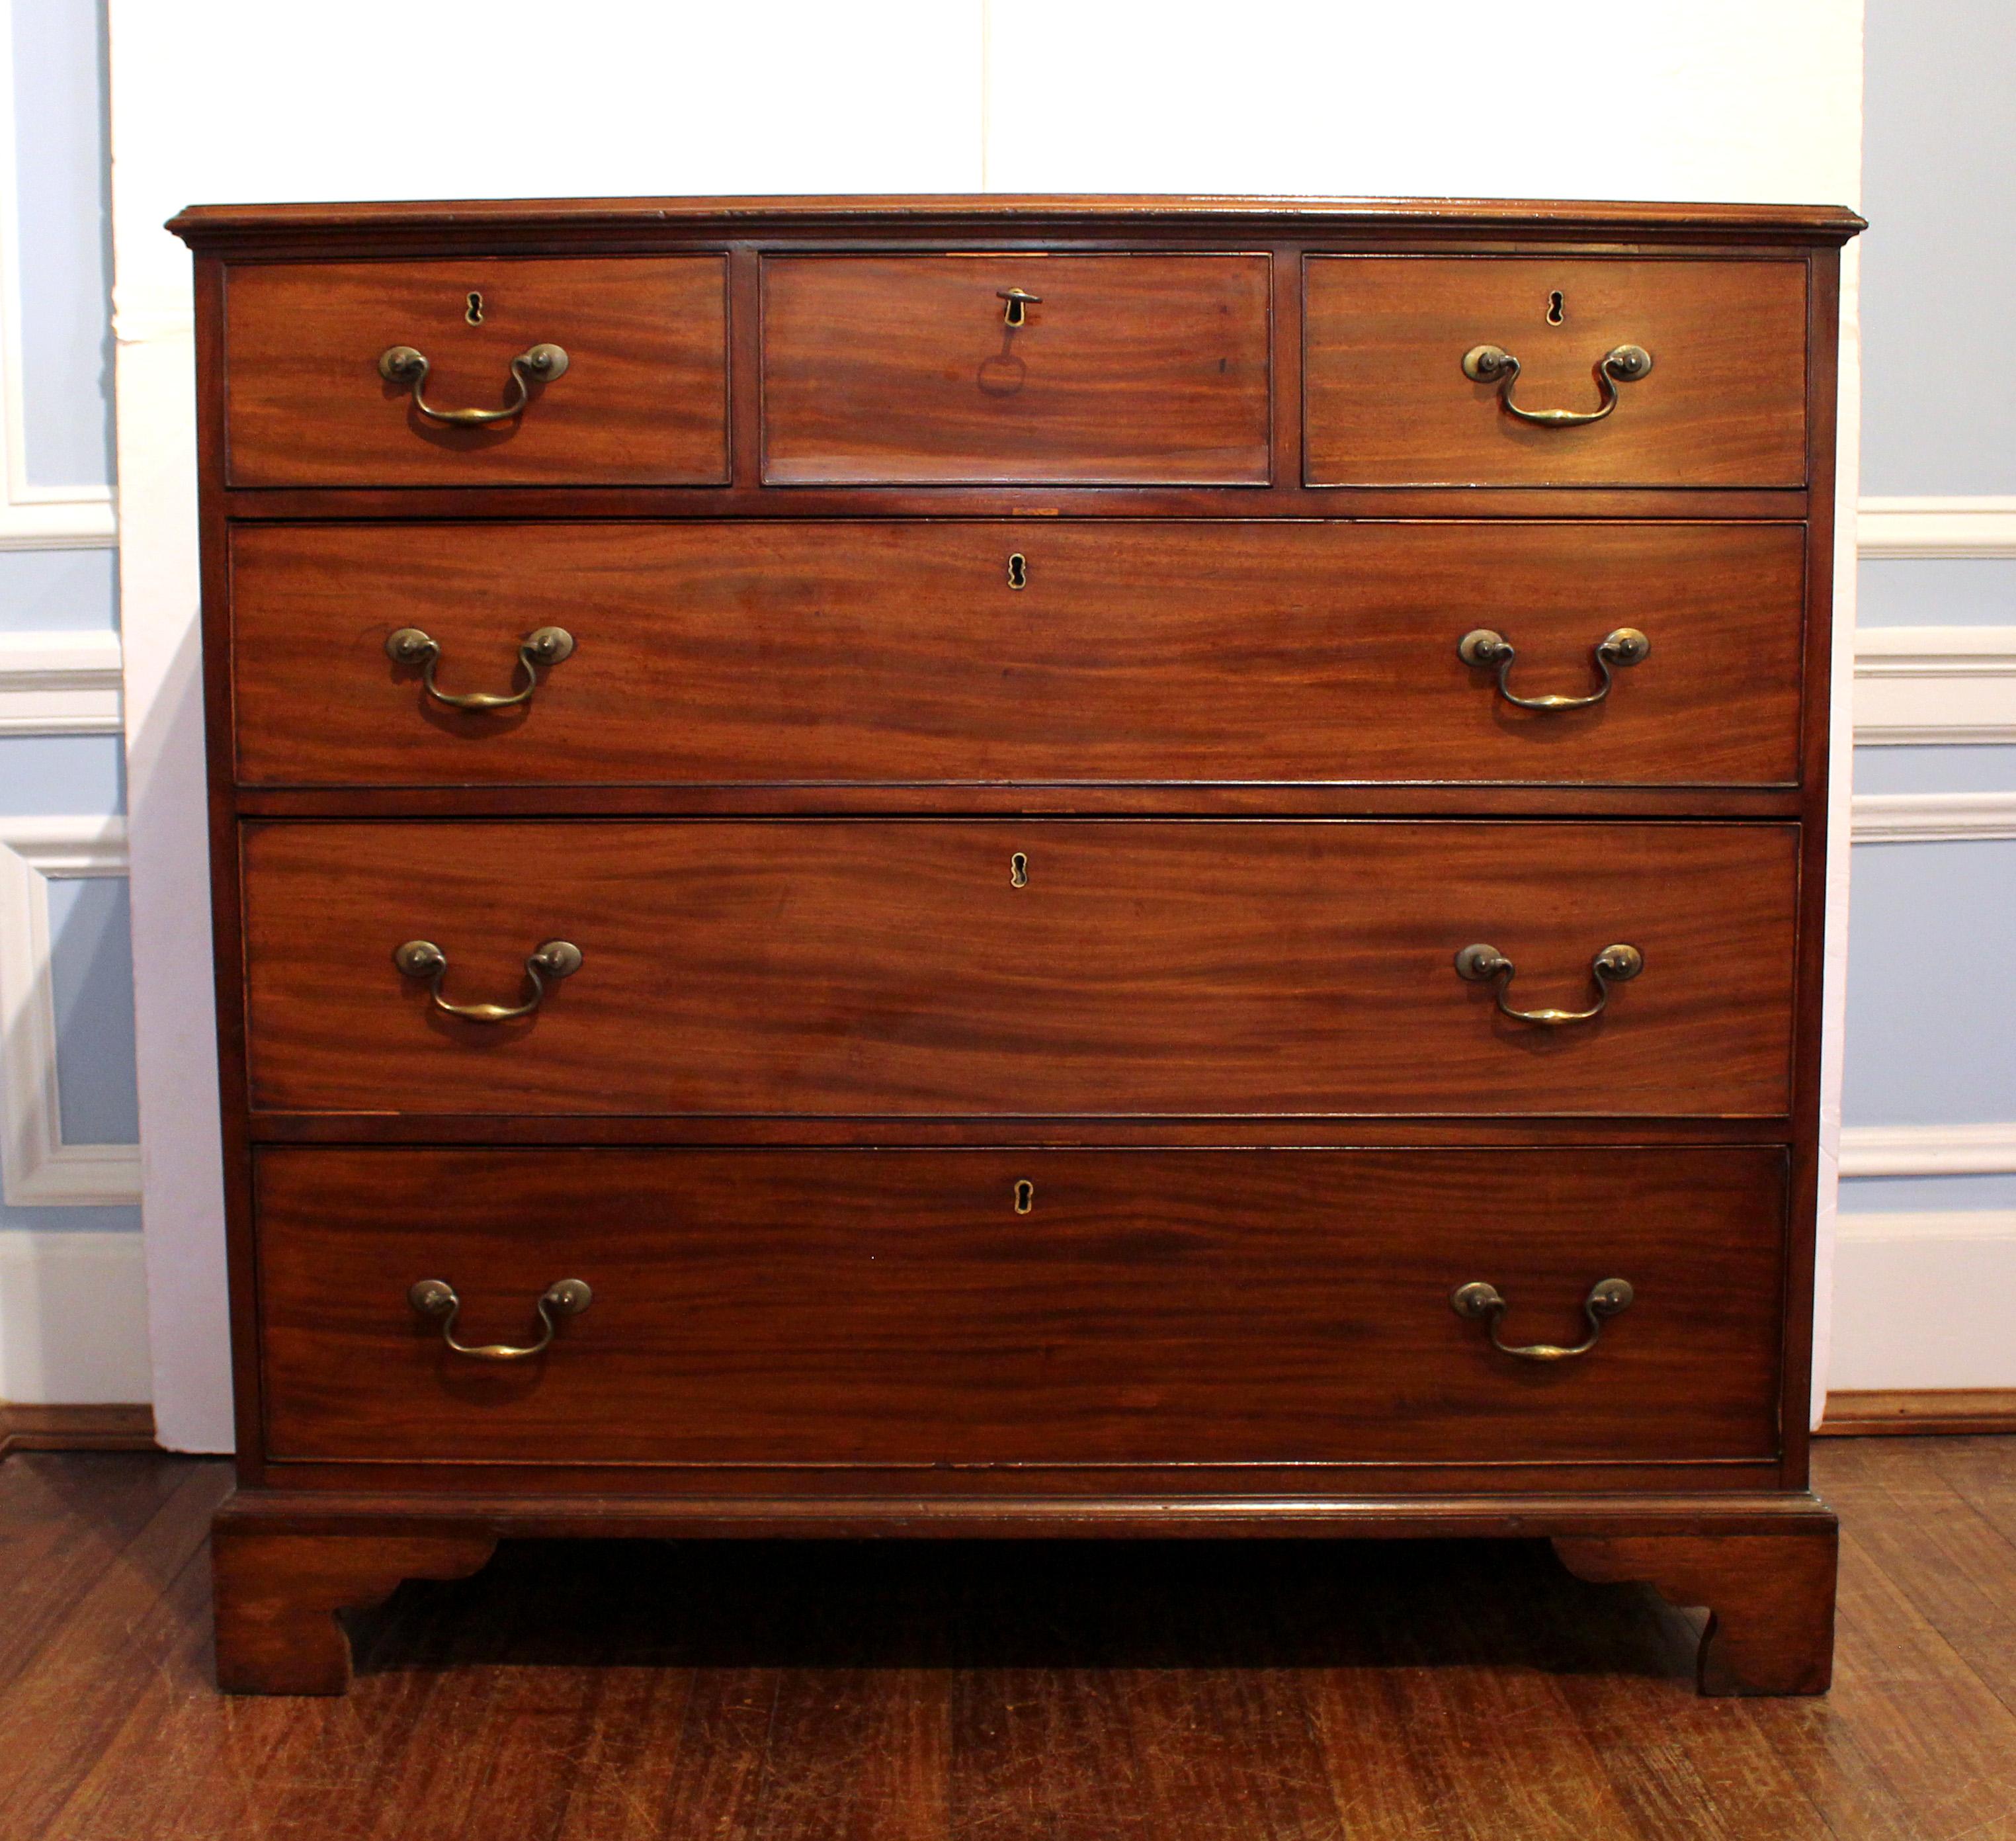 Circa 1780 Scottish 3 over 3 drawer chest of drawers. Well molded top. Mahogany with oak secondary wood. Original bail & rosette handles. The central upper drawer with just a key for opening maintaining the overall aesthetic of the piece. Well